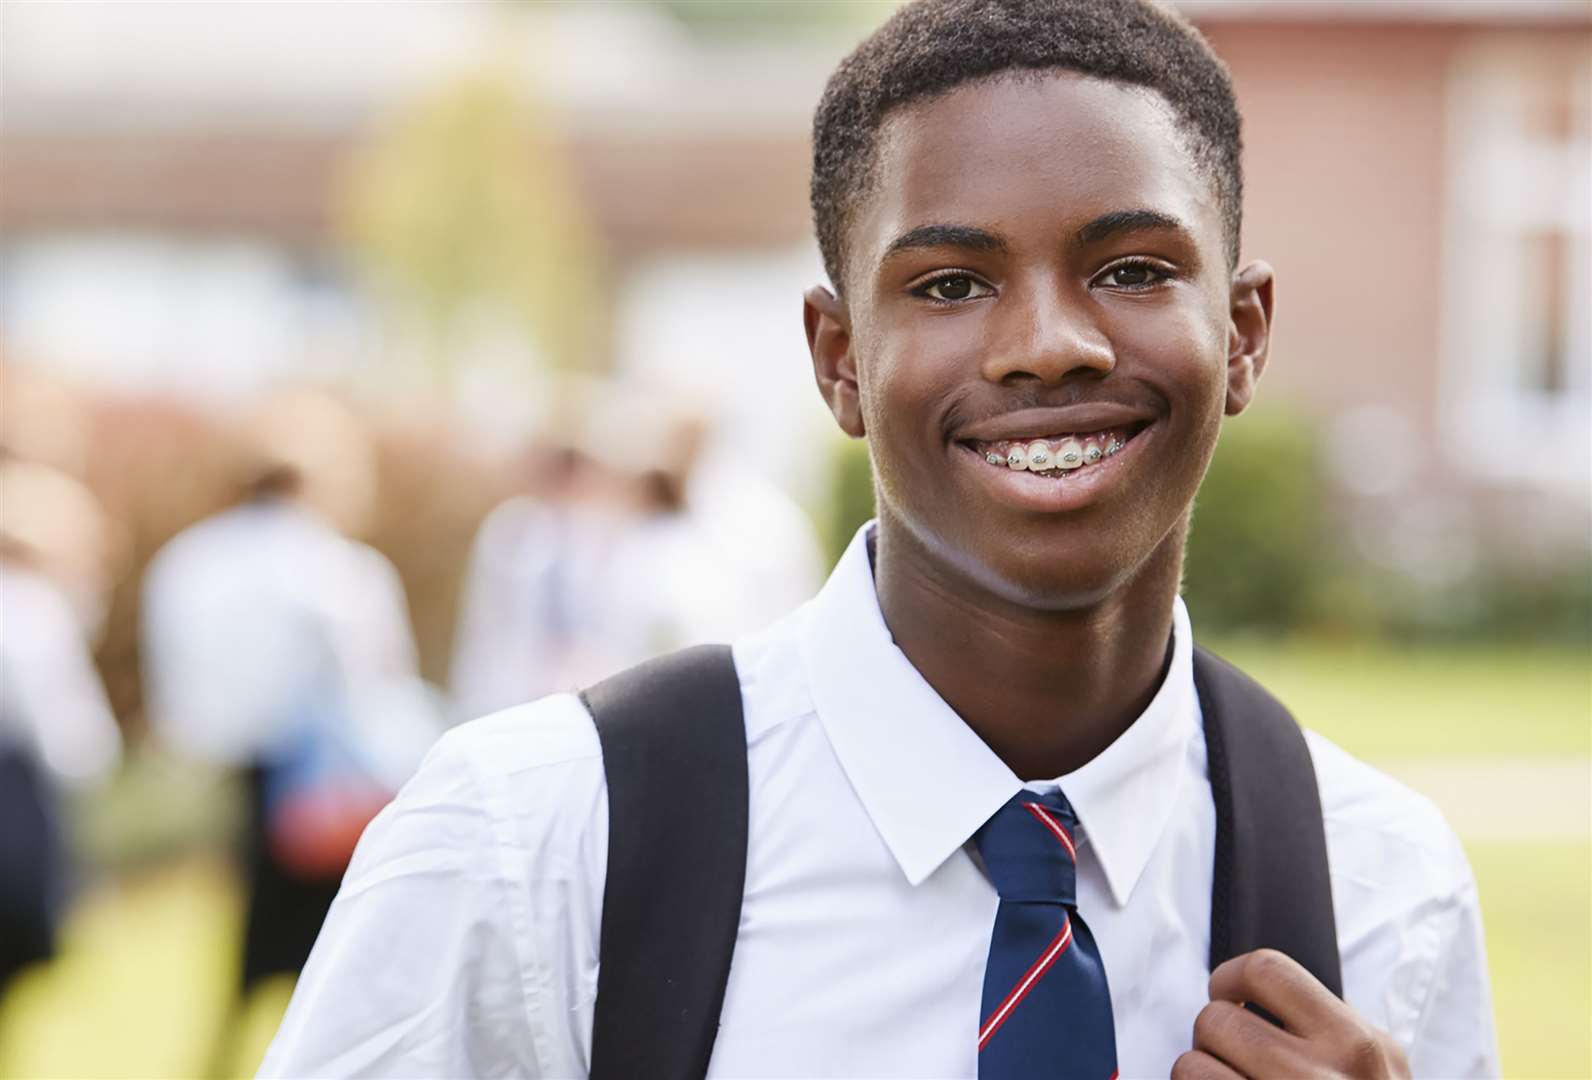 Children starting secondary school this September will be offered a place at a school today